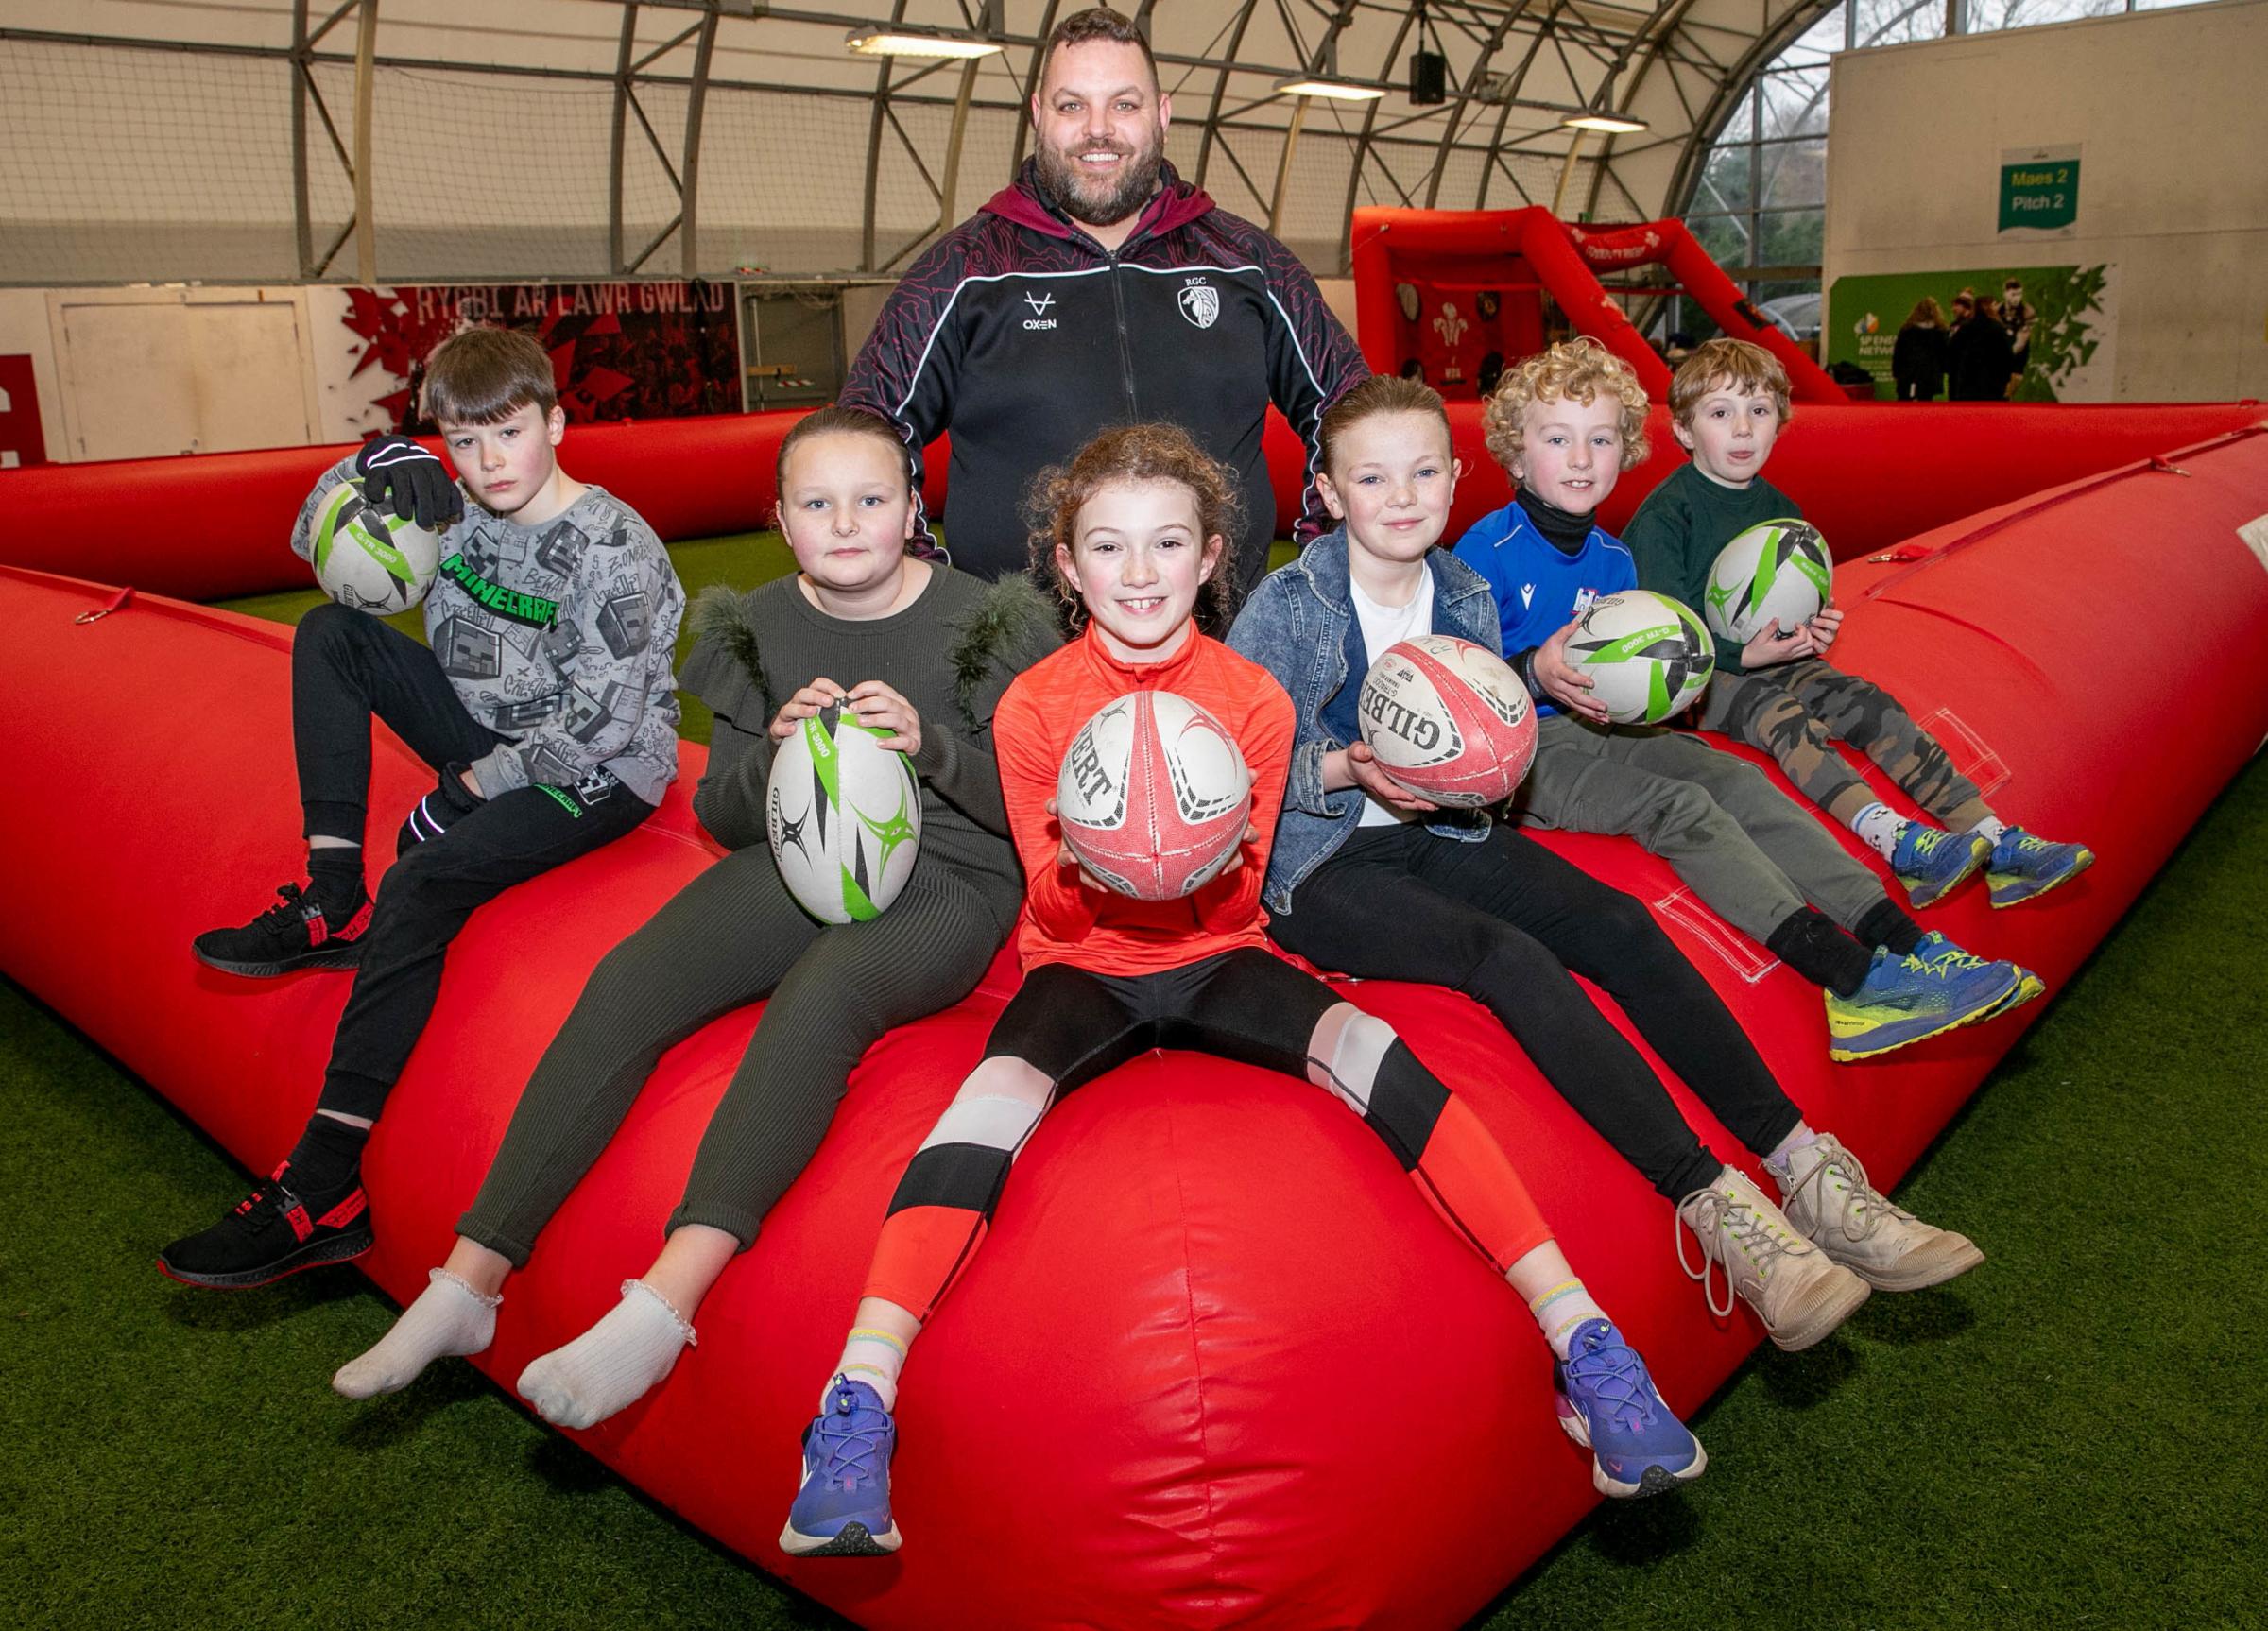 Cartrefi Conwy Sport for Kids event at Eirias Park before the RGC 1404 v Ebbw Vale rugby match Activity leader Jason Craig with Theo Garrathy, Kira Fodan, Zoe James, Kayleigh Fishwick, Joseff James and Ioan James